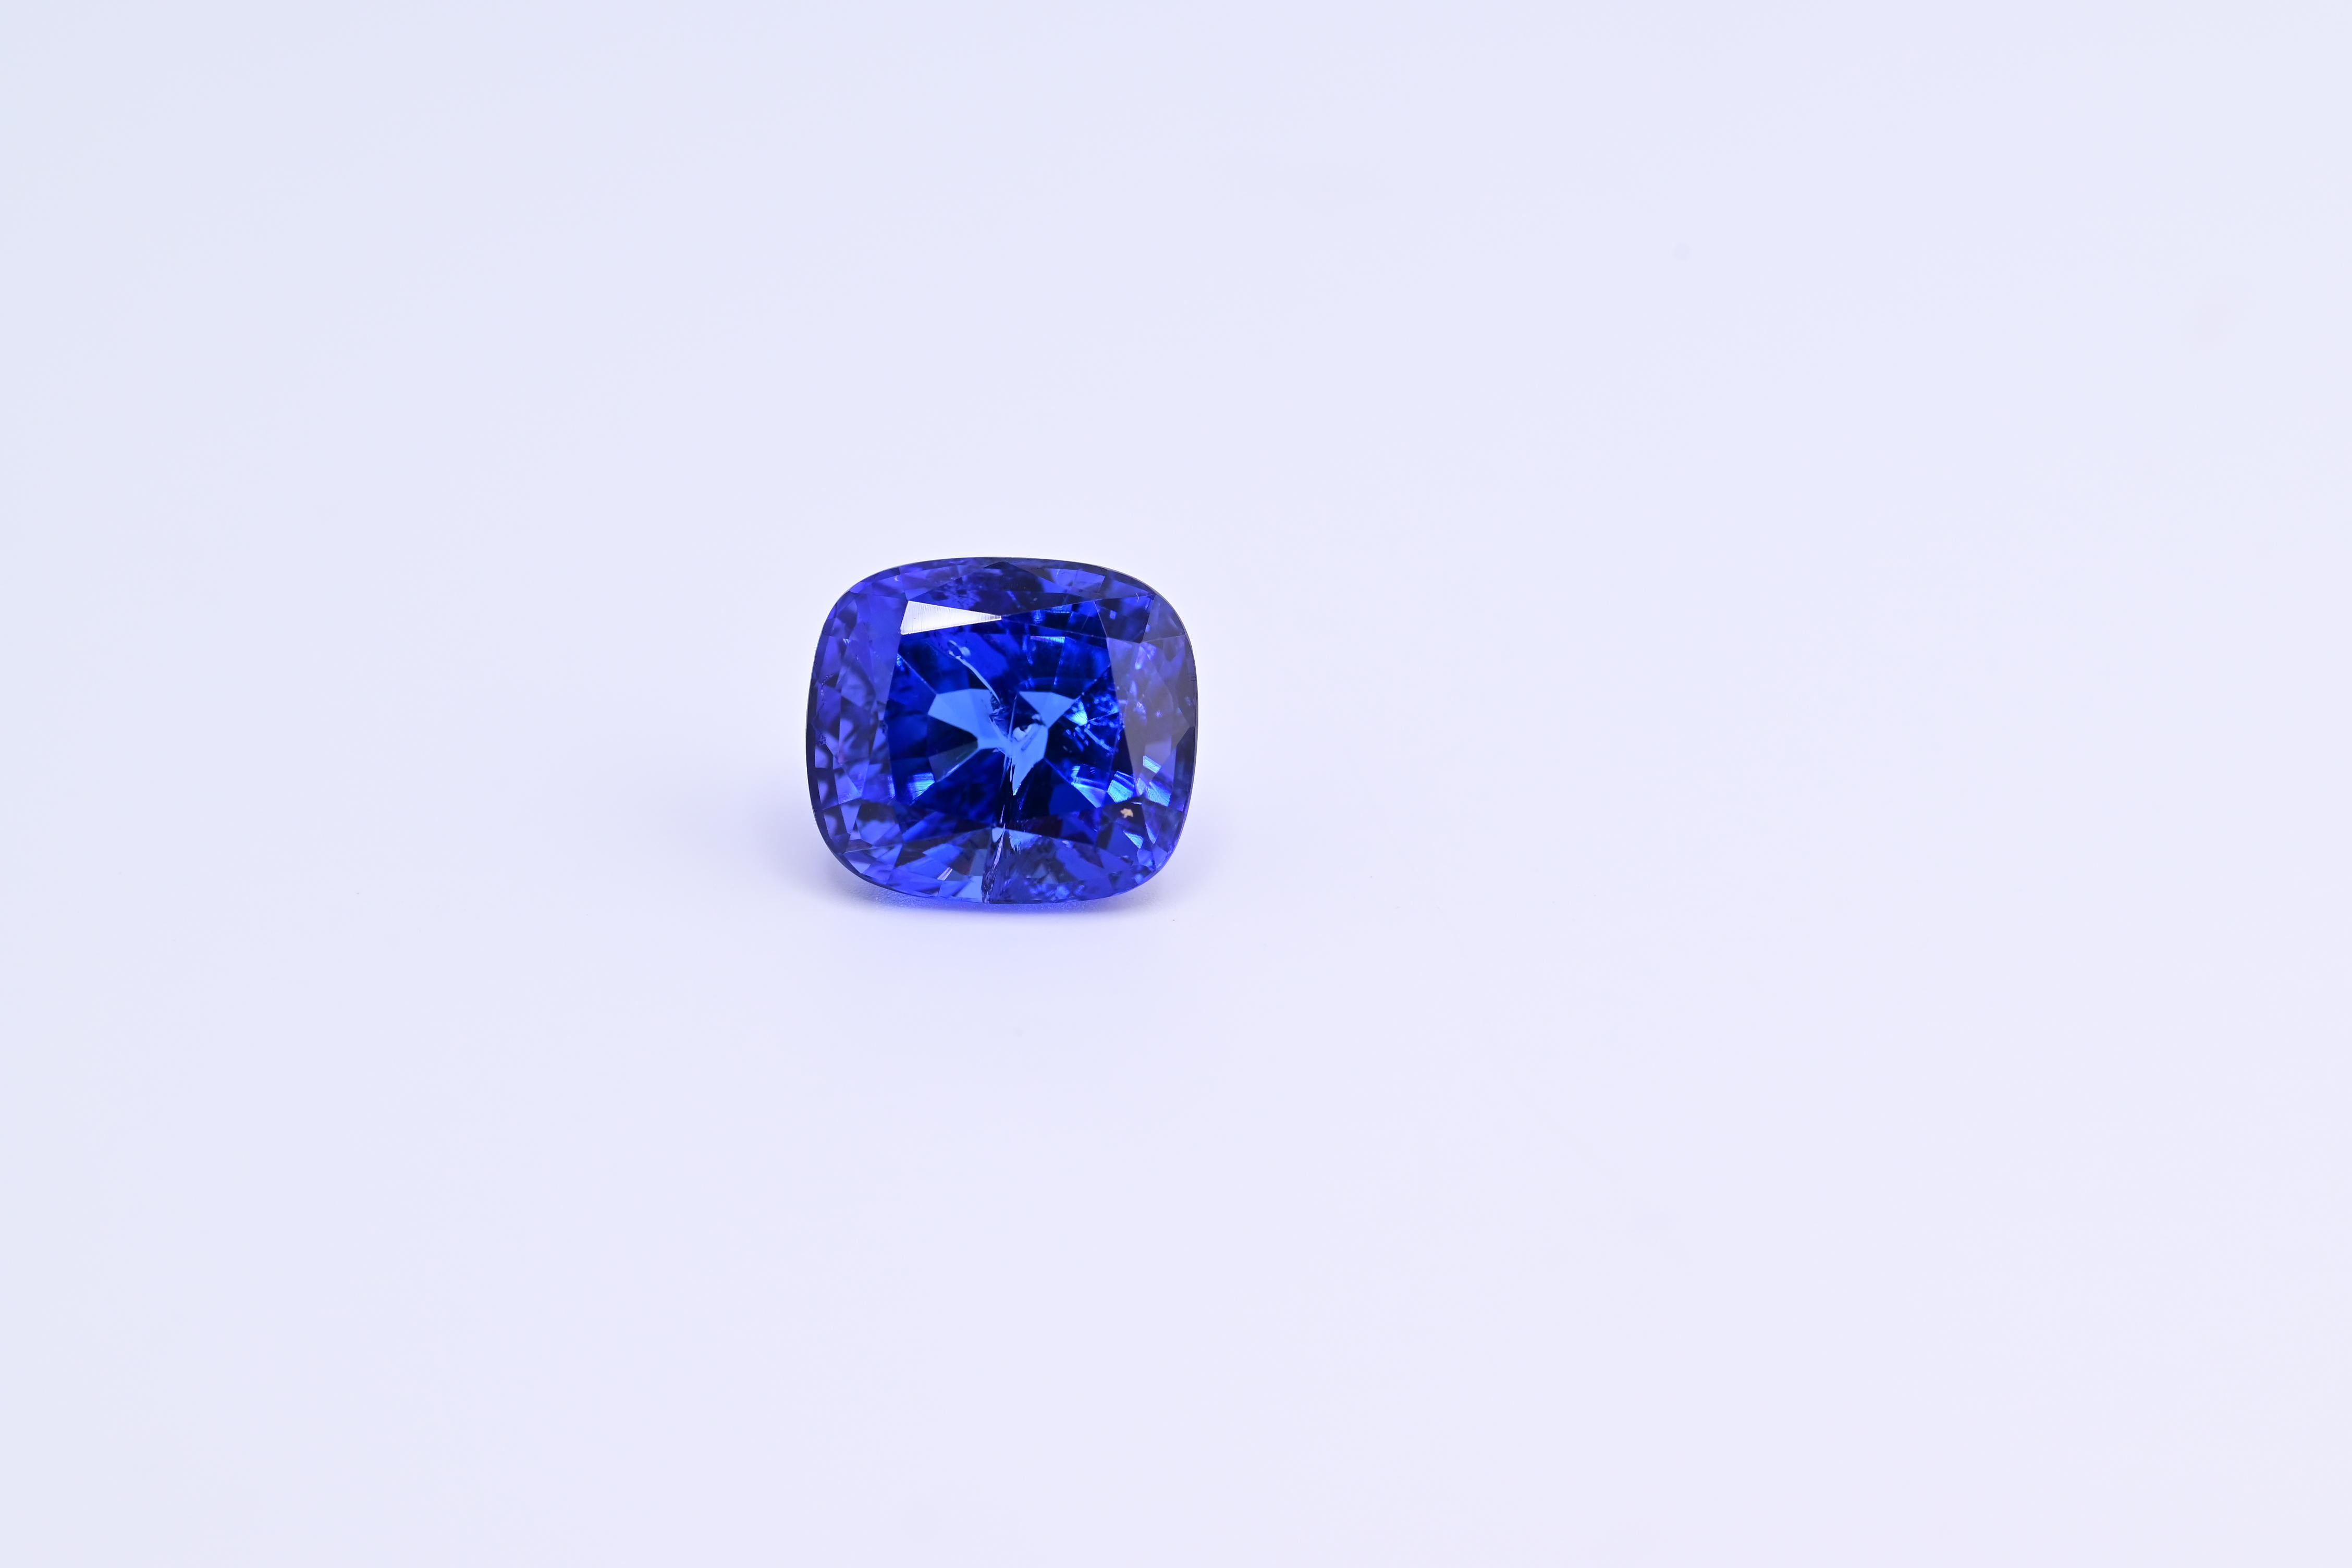 GIA REPORT NUMBER: 6234199403


This exceptional loose tanzanite stone, weighing 11.01 carats, has been certified by the Gemological Institute of America (GIA) for its authenticity. With its beautiful vivid hue, this gemstone is sure to add a touch